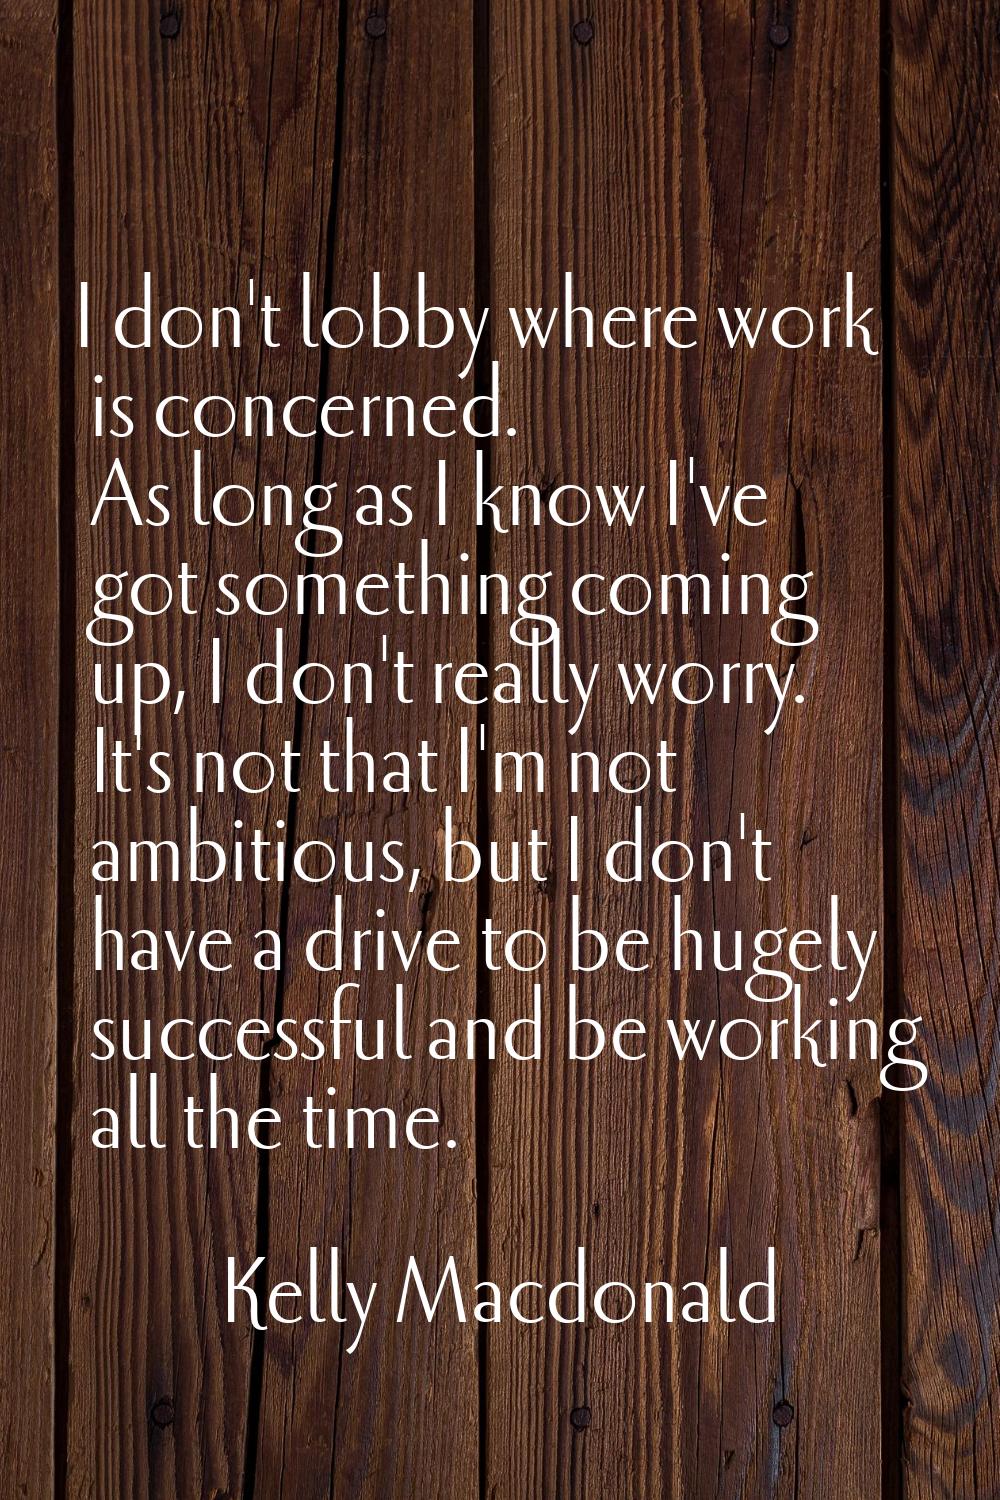 I don't lobby where work is concerned. As long as I know I've got something coming up, I don't real